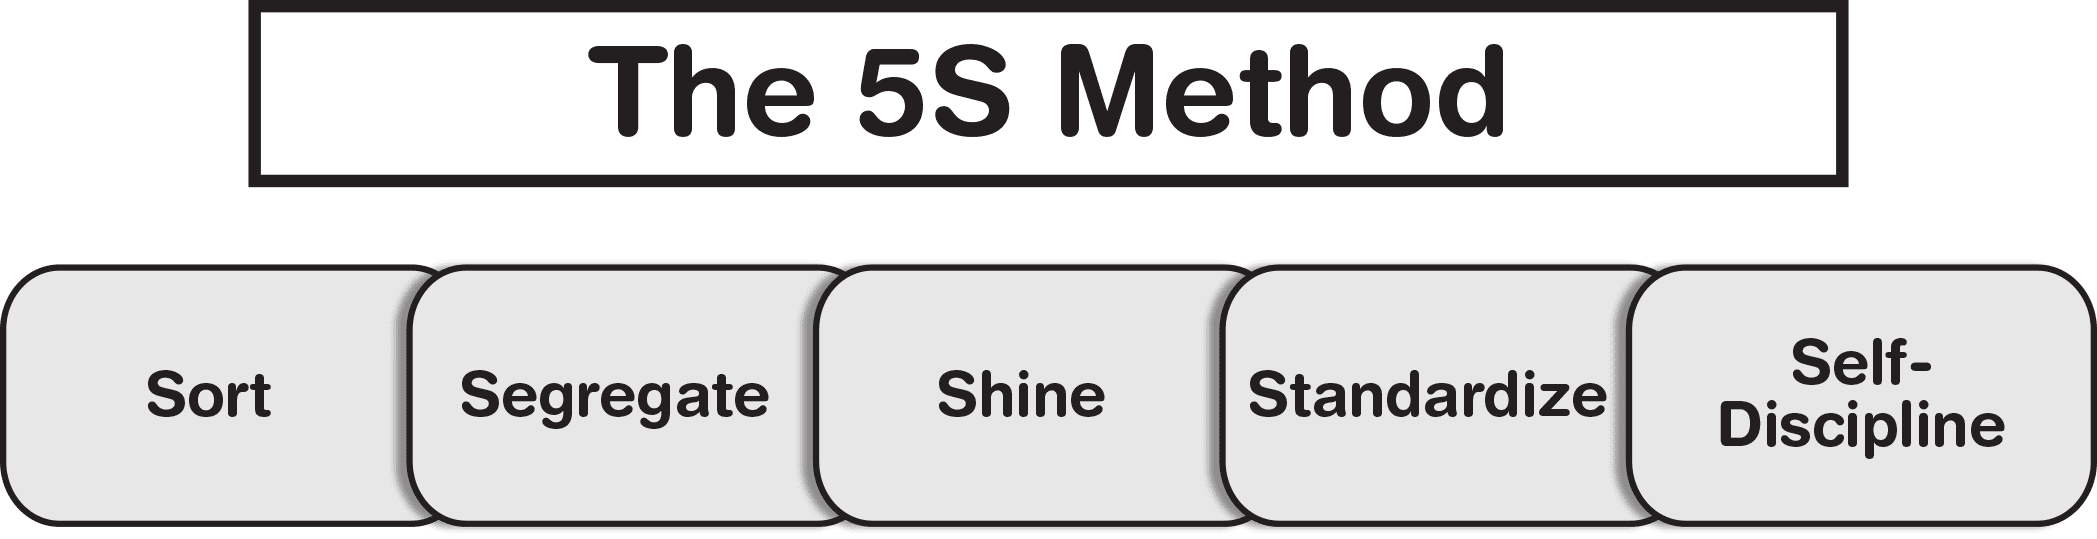 5S stands for sort, segregate, shine, standardize, and self-discipline. These steps are successive and build upon one another to produce repeatable, teachable, and consistent successes.